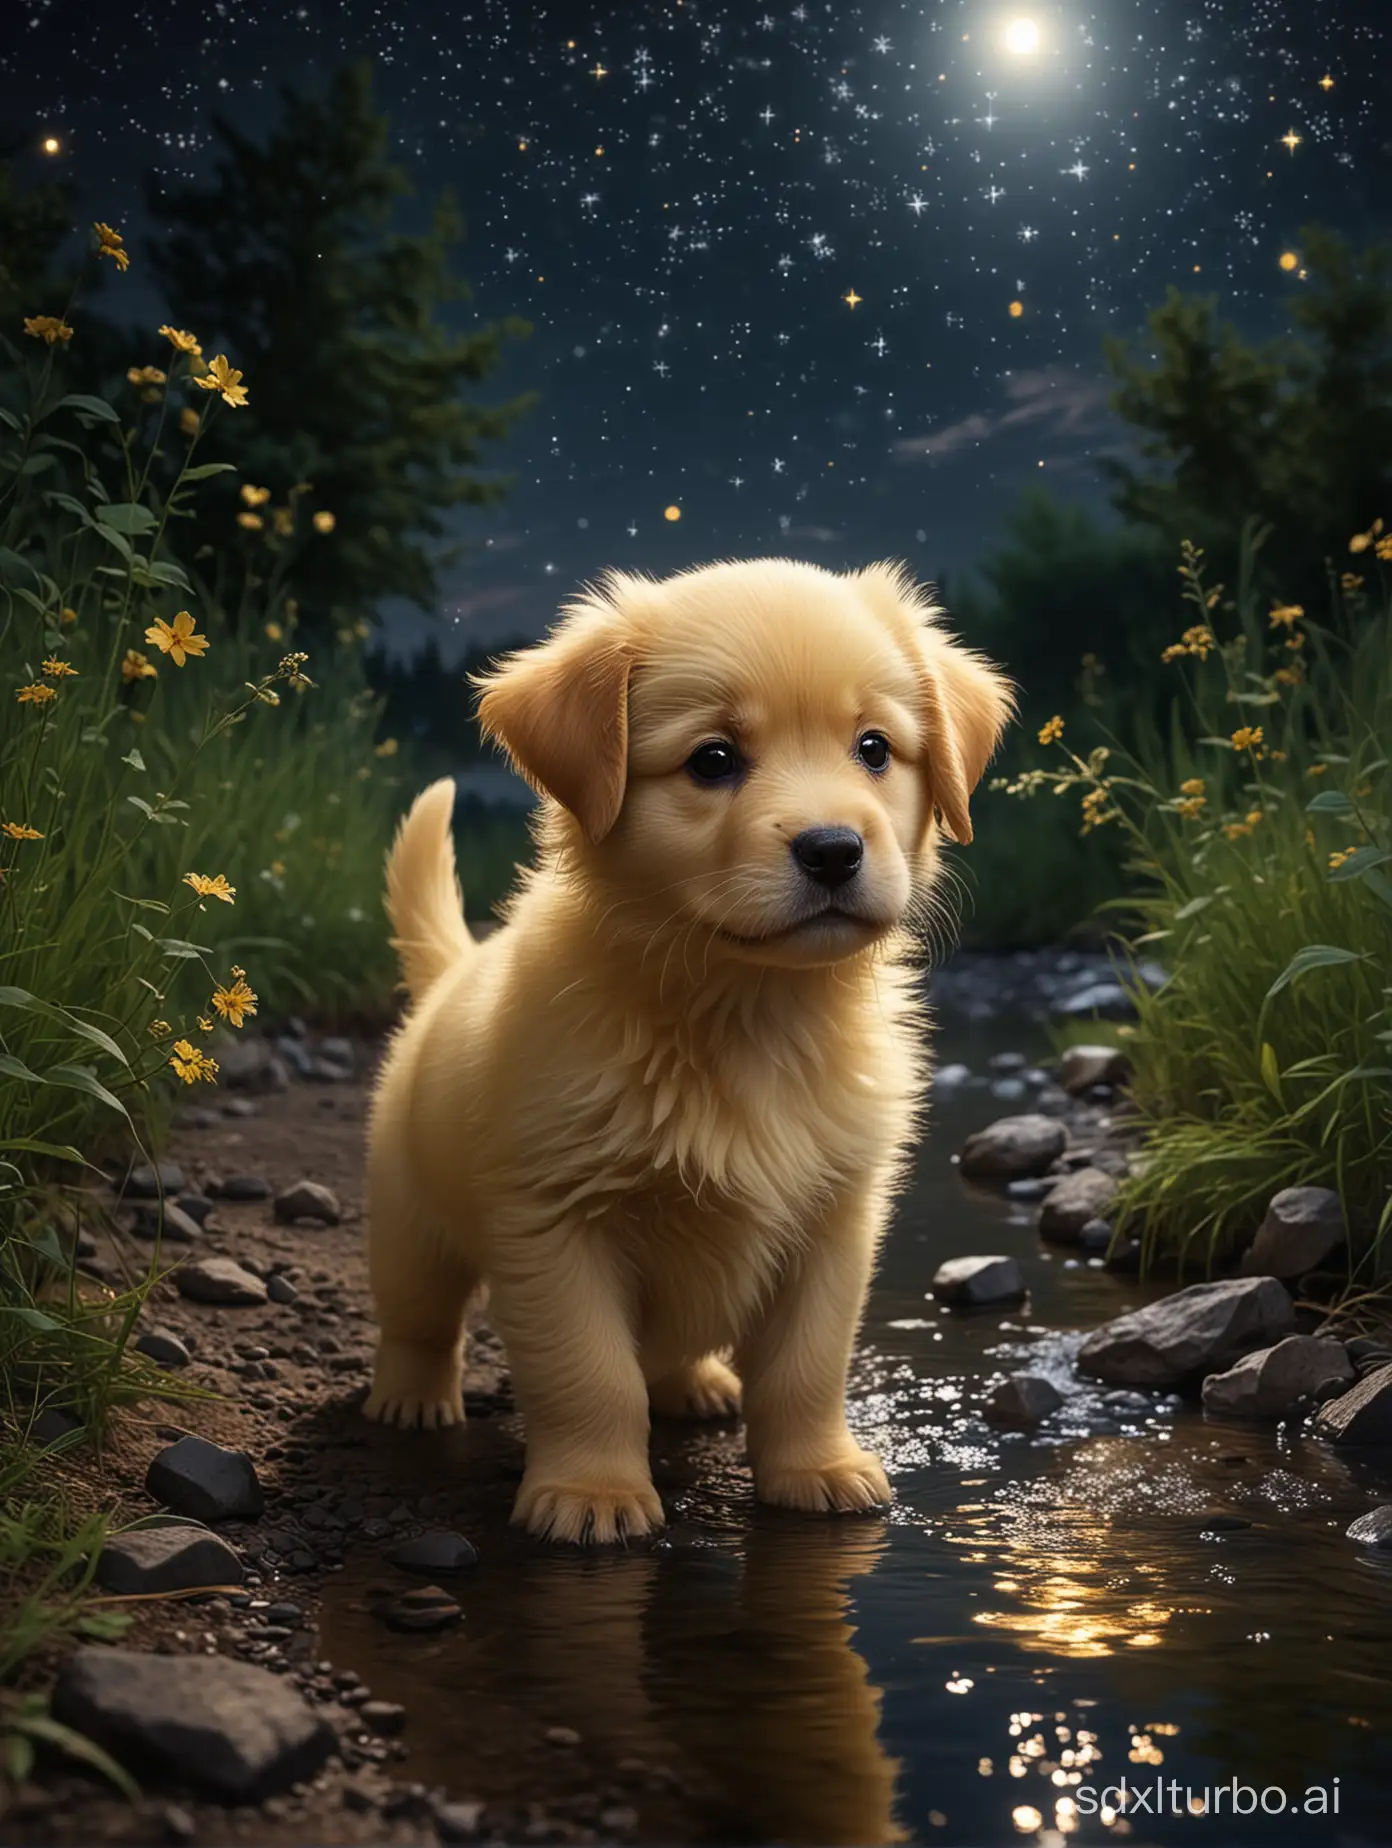 Adorable-Yellow-Puppy-by-the-River-Under-Starry-Night-Sky